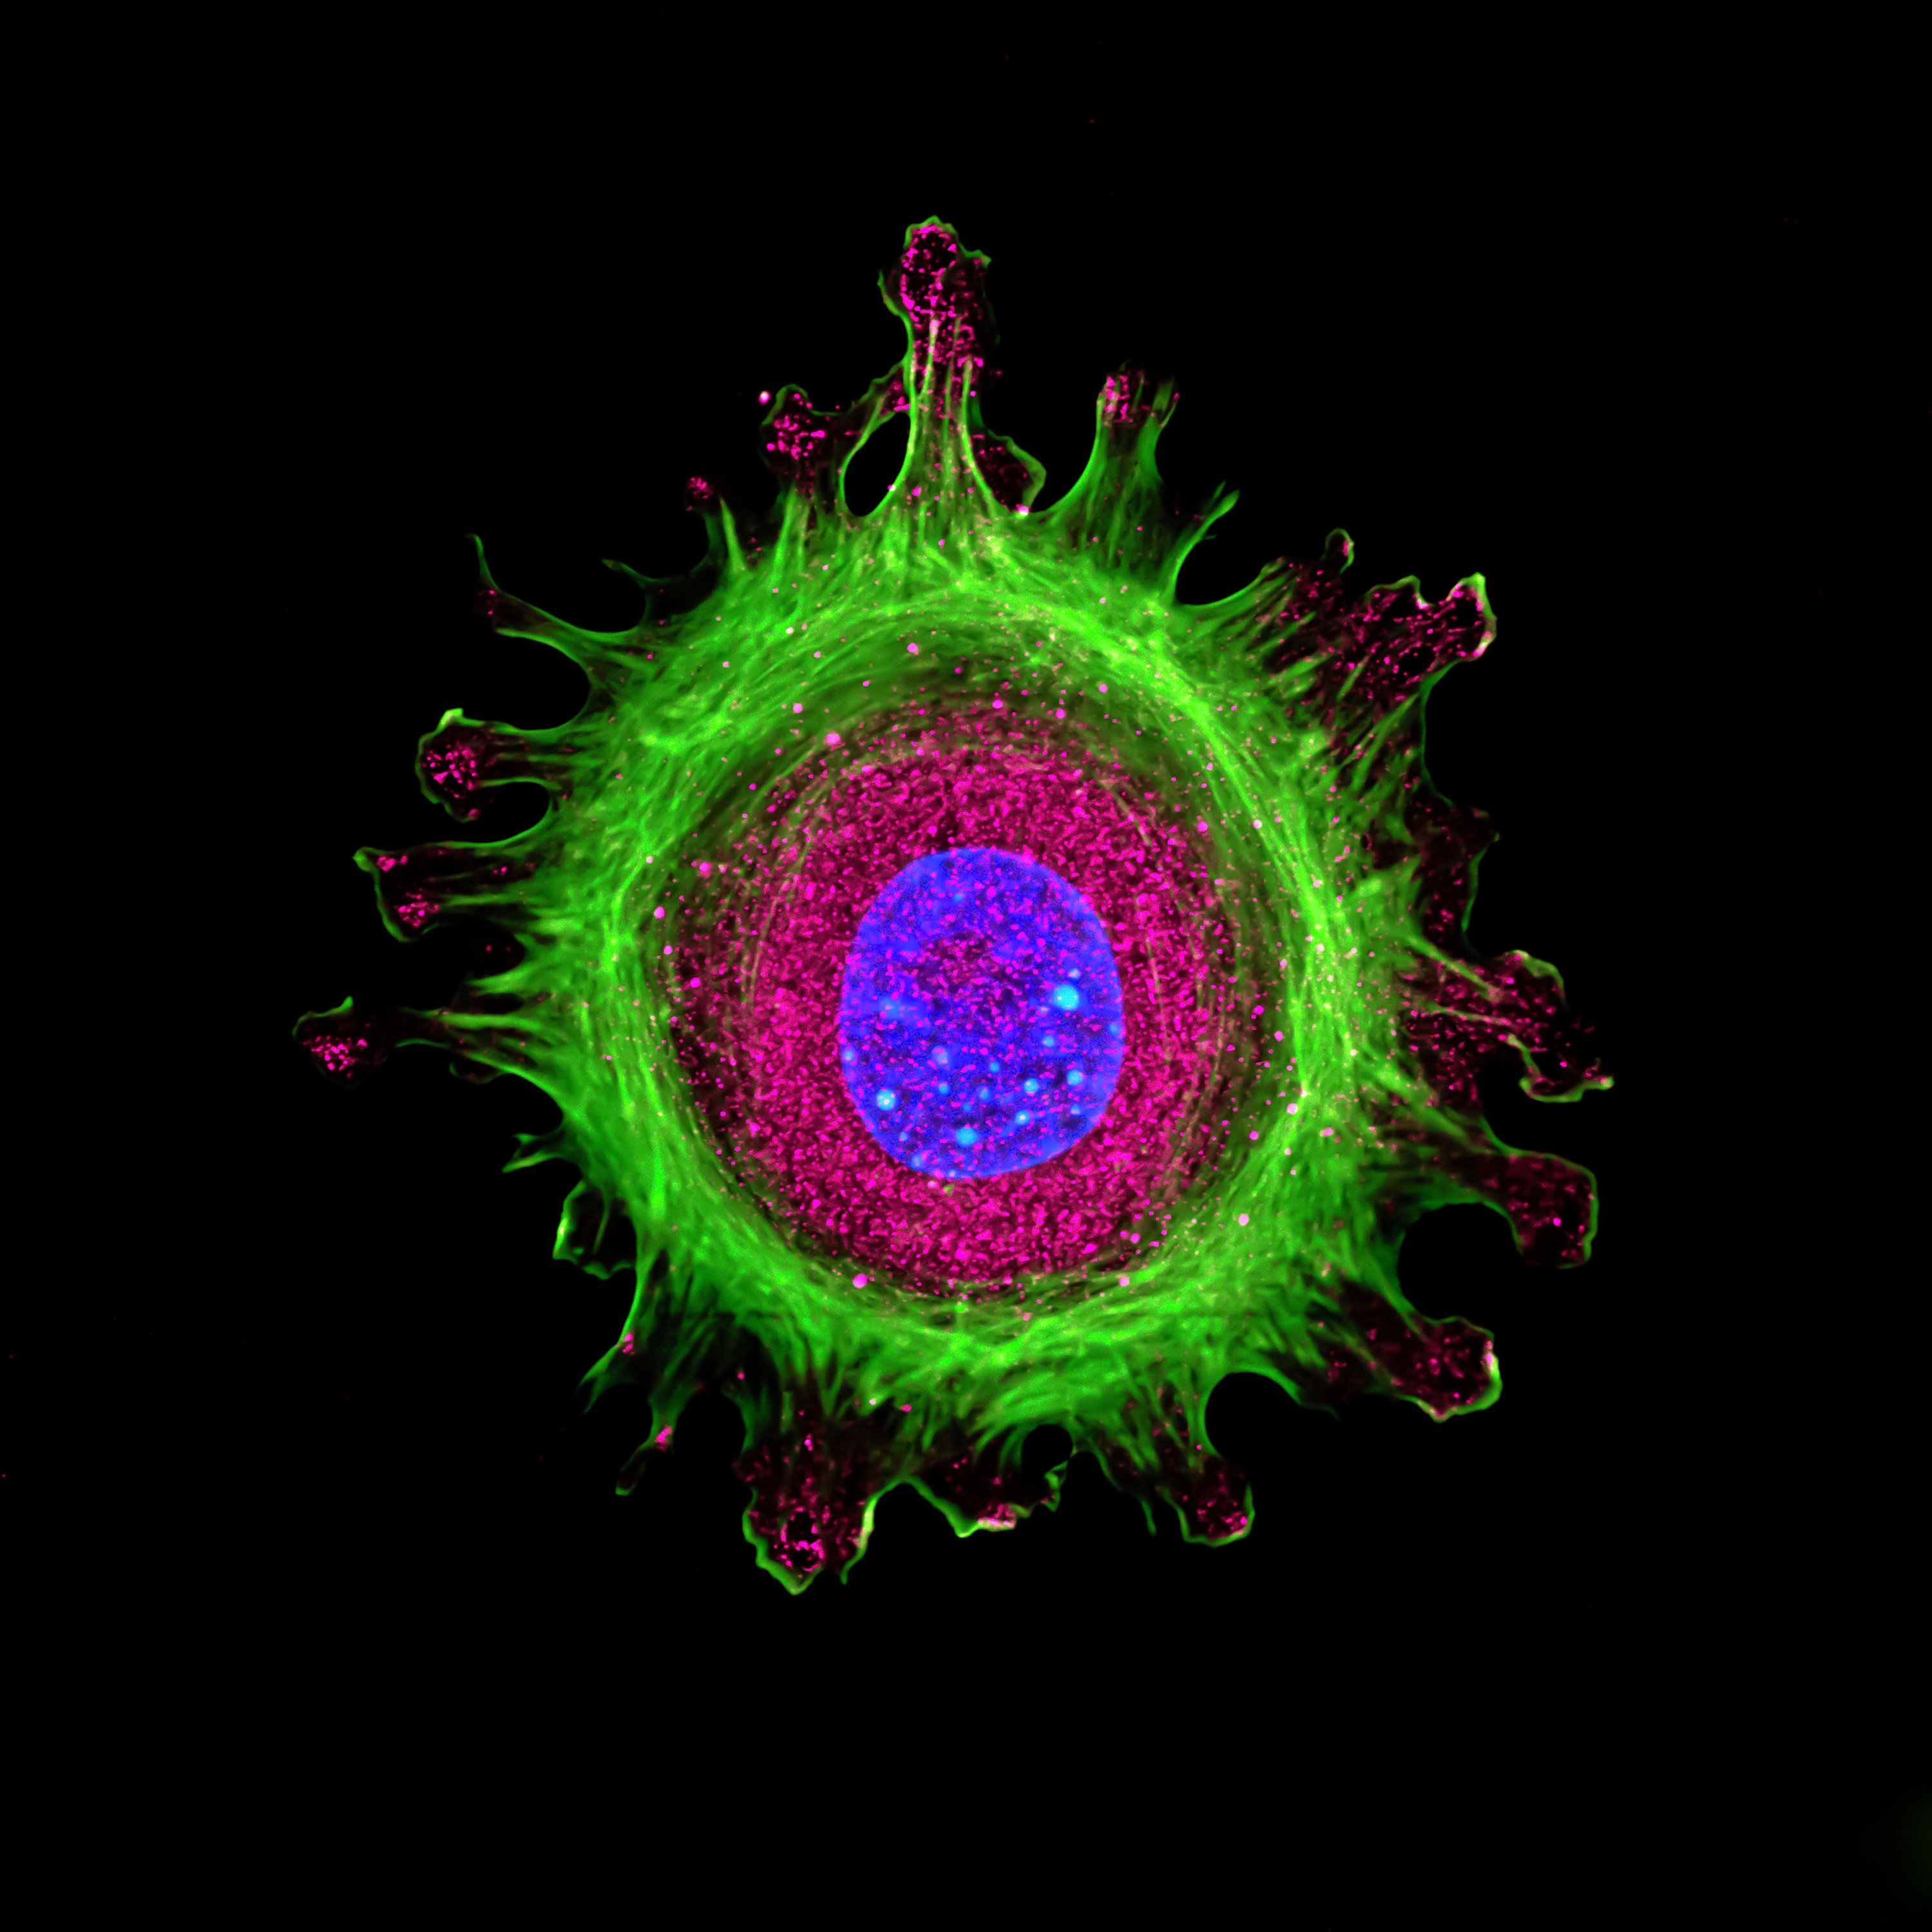 Immunofluorescence of single human cell stained, grown in tissue culture, stained with multiple antibodies and visualized via confocal microscopy